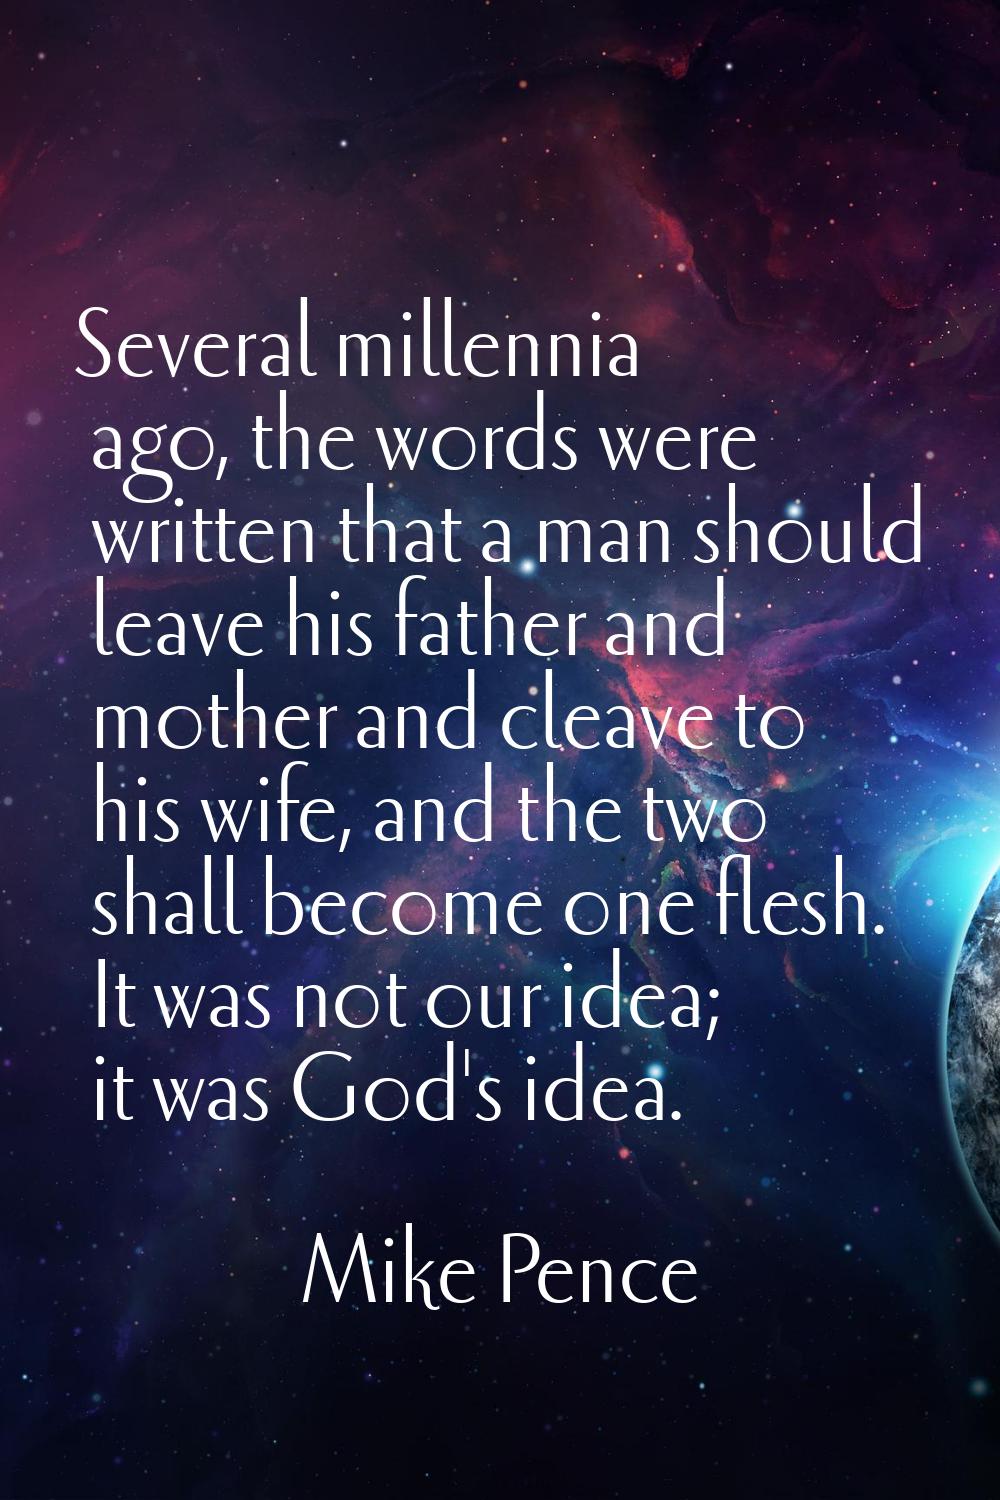 Several millennia ago, the words were written that a man should leave his father and mother and cle